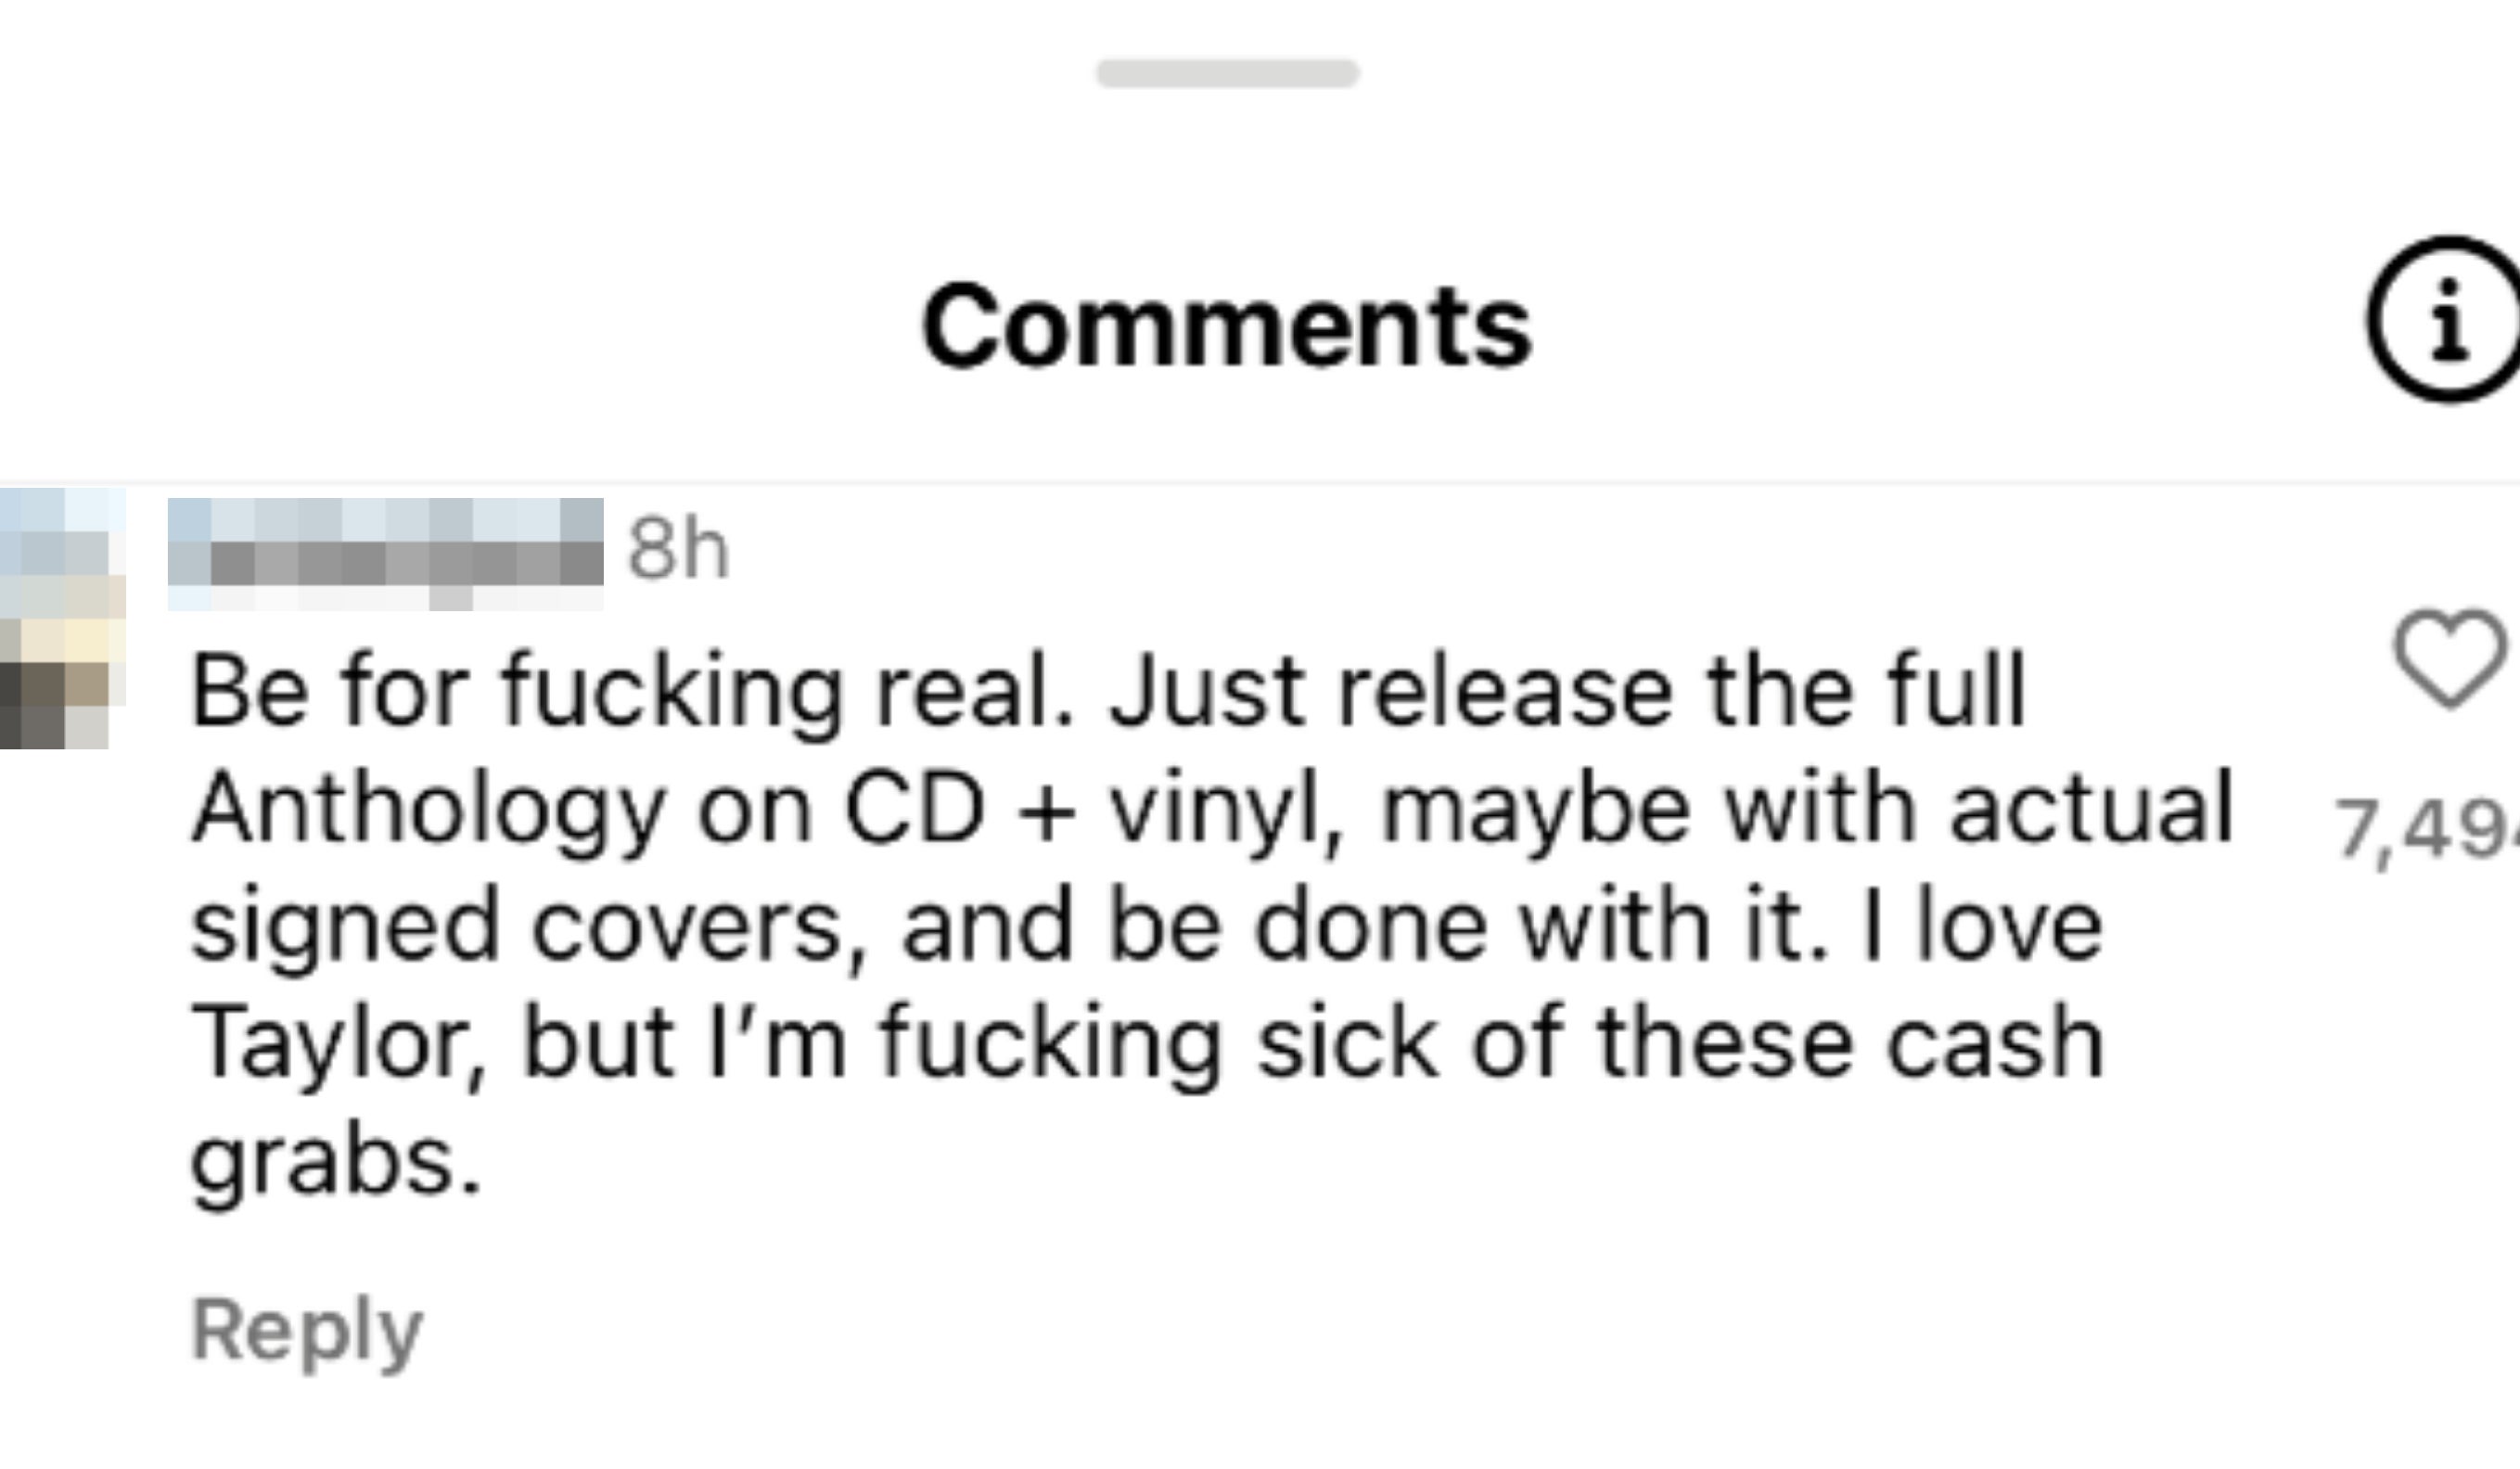 Screenshot of a comment on Instagram